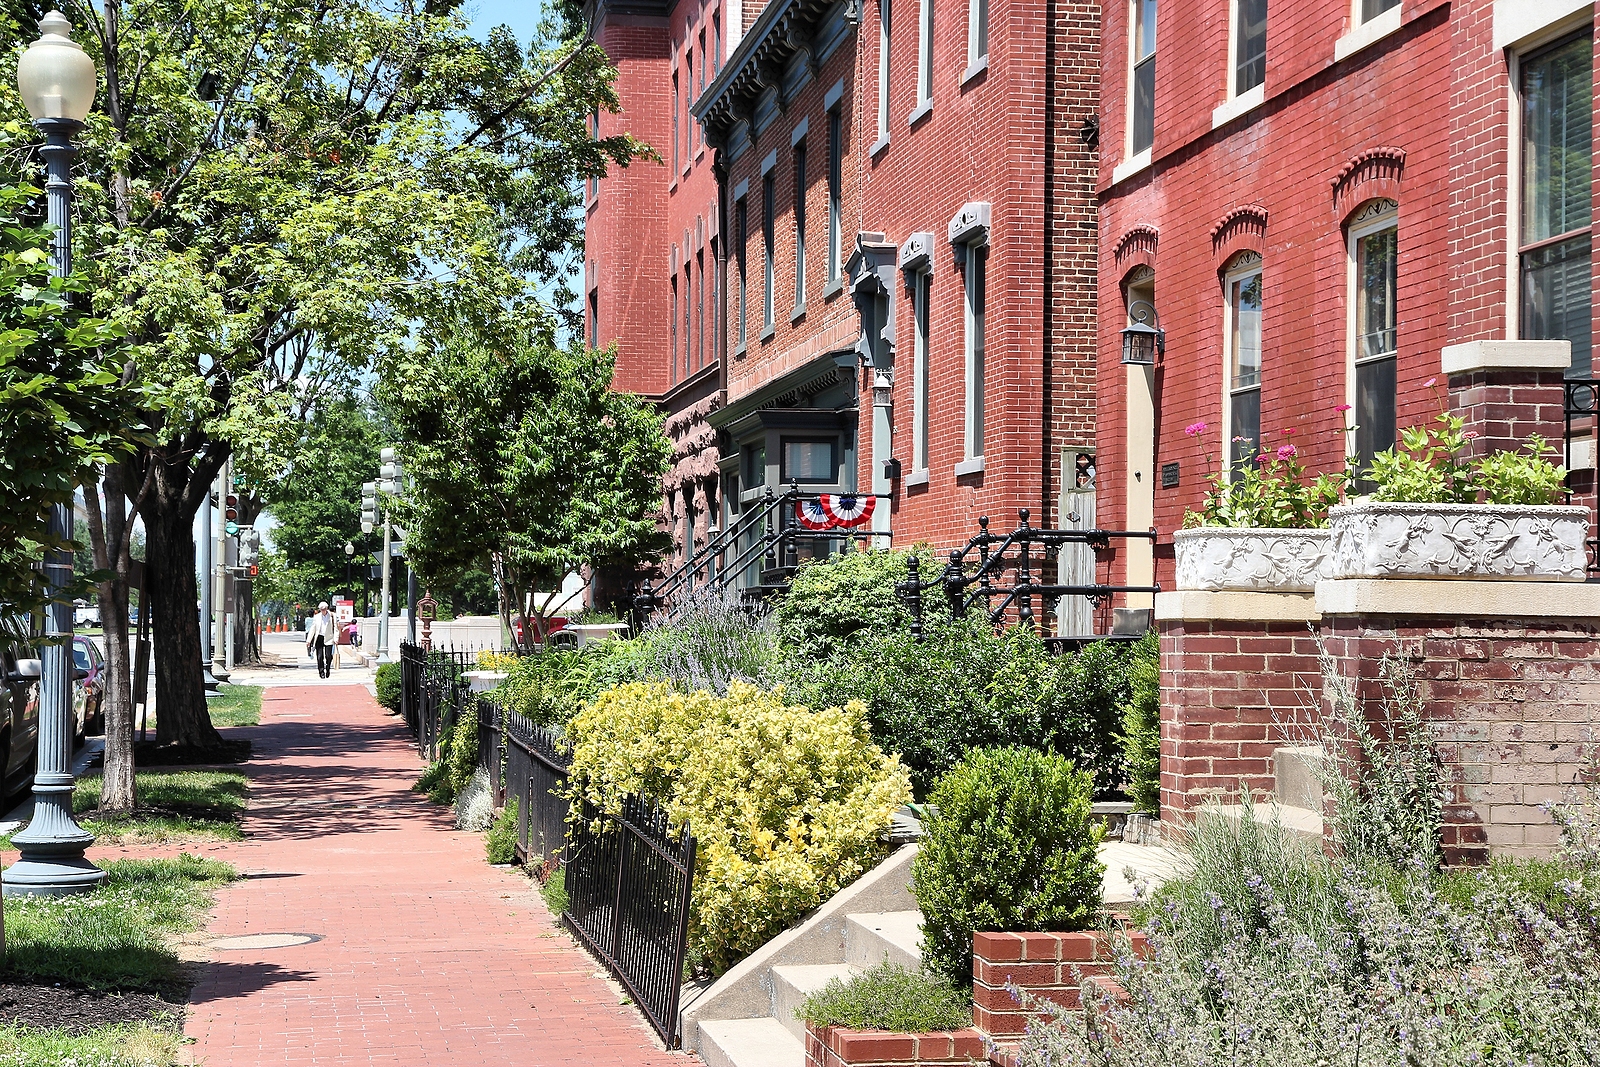 What-You-Need to-Know-About-Tuckpointing-a-Historic-Brick-Home-Renaissance-Development-DC